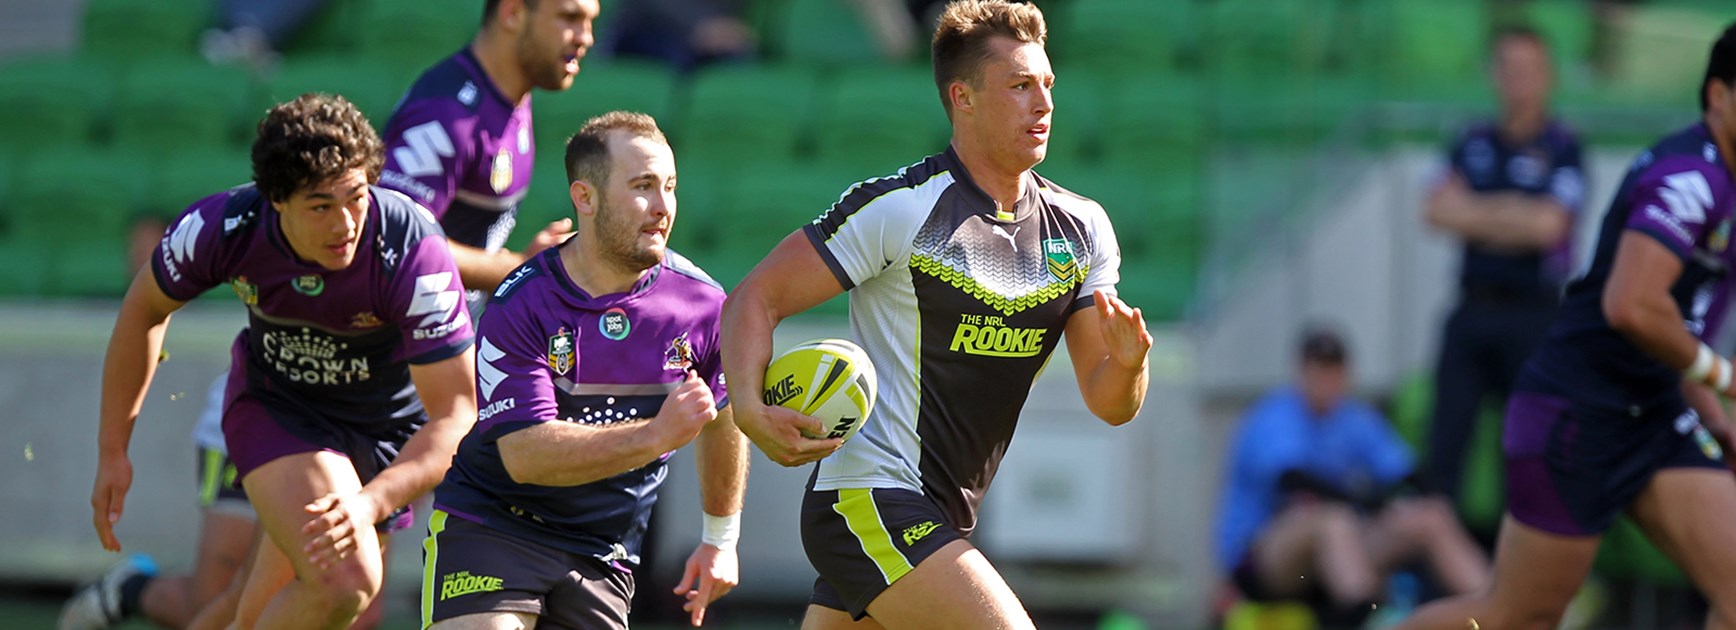 The NRL Rookies took on the Melbourne Storm National Youth Cup team at AAMI Park in Episode 4.